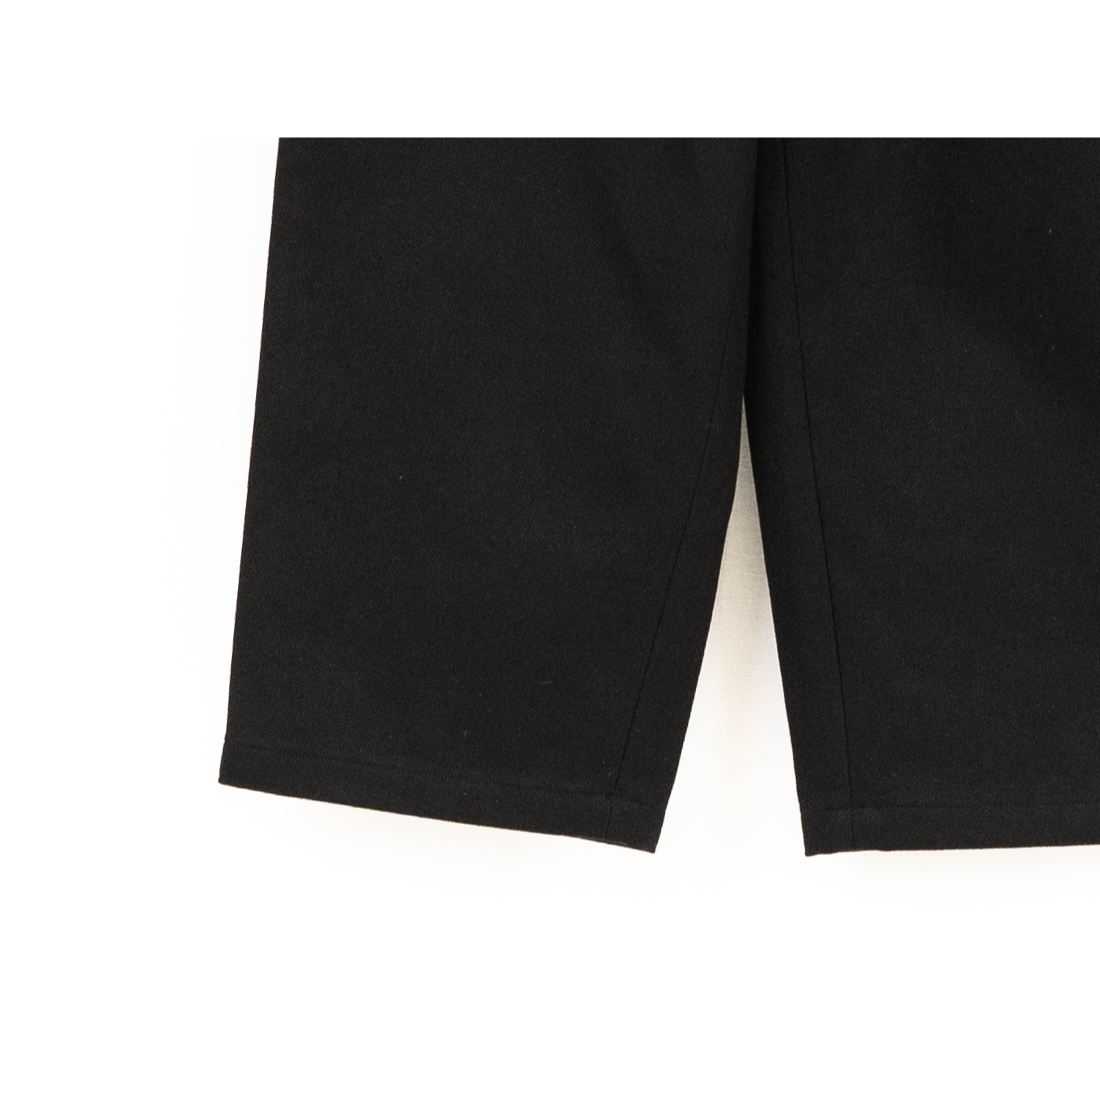 REVERBERATE / BELTED TROUSERS TYPE 2